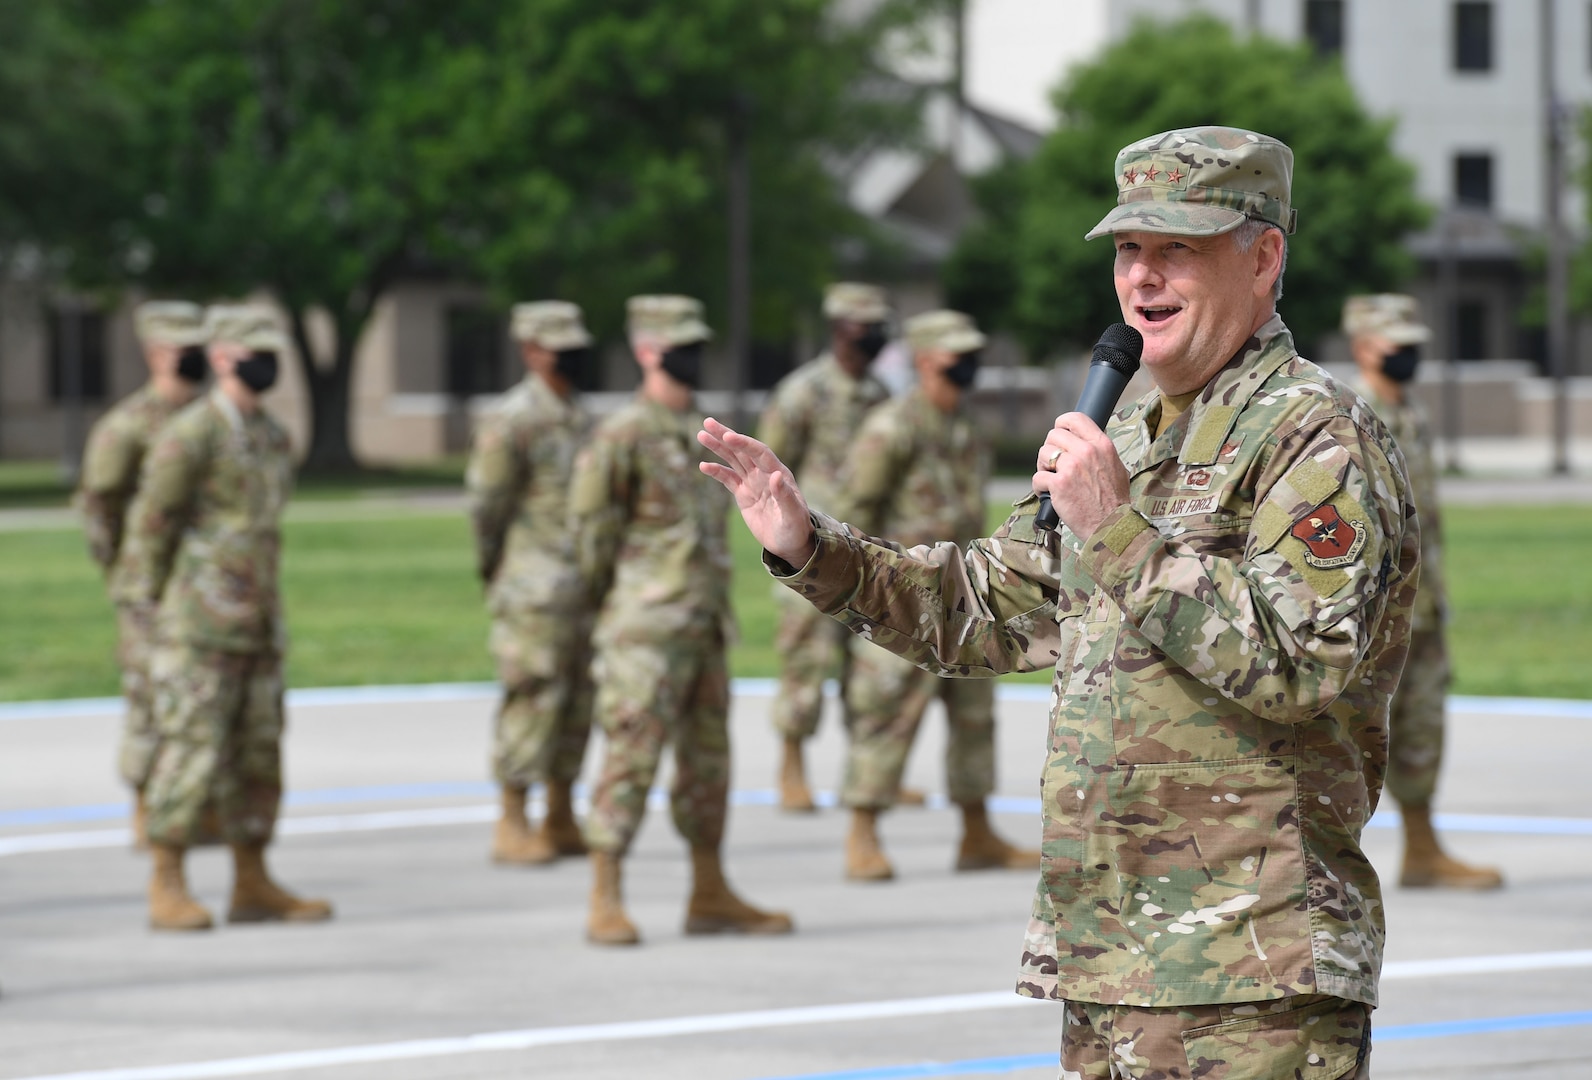 Feasibility Of Secondary Air Force Bmt Location Proven; Covid-19 Surge  Operations Begin June 2 > Joint Base San Antonio > News